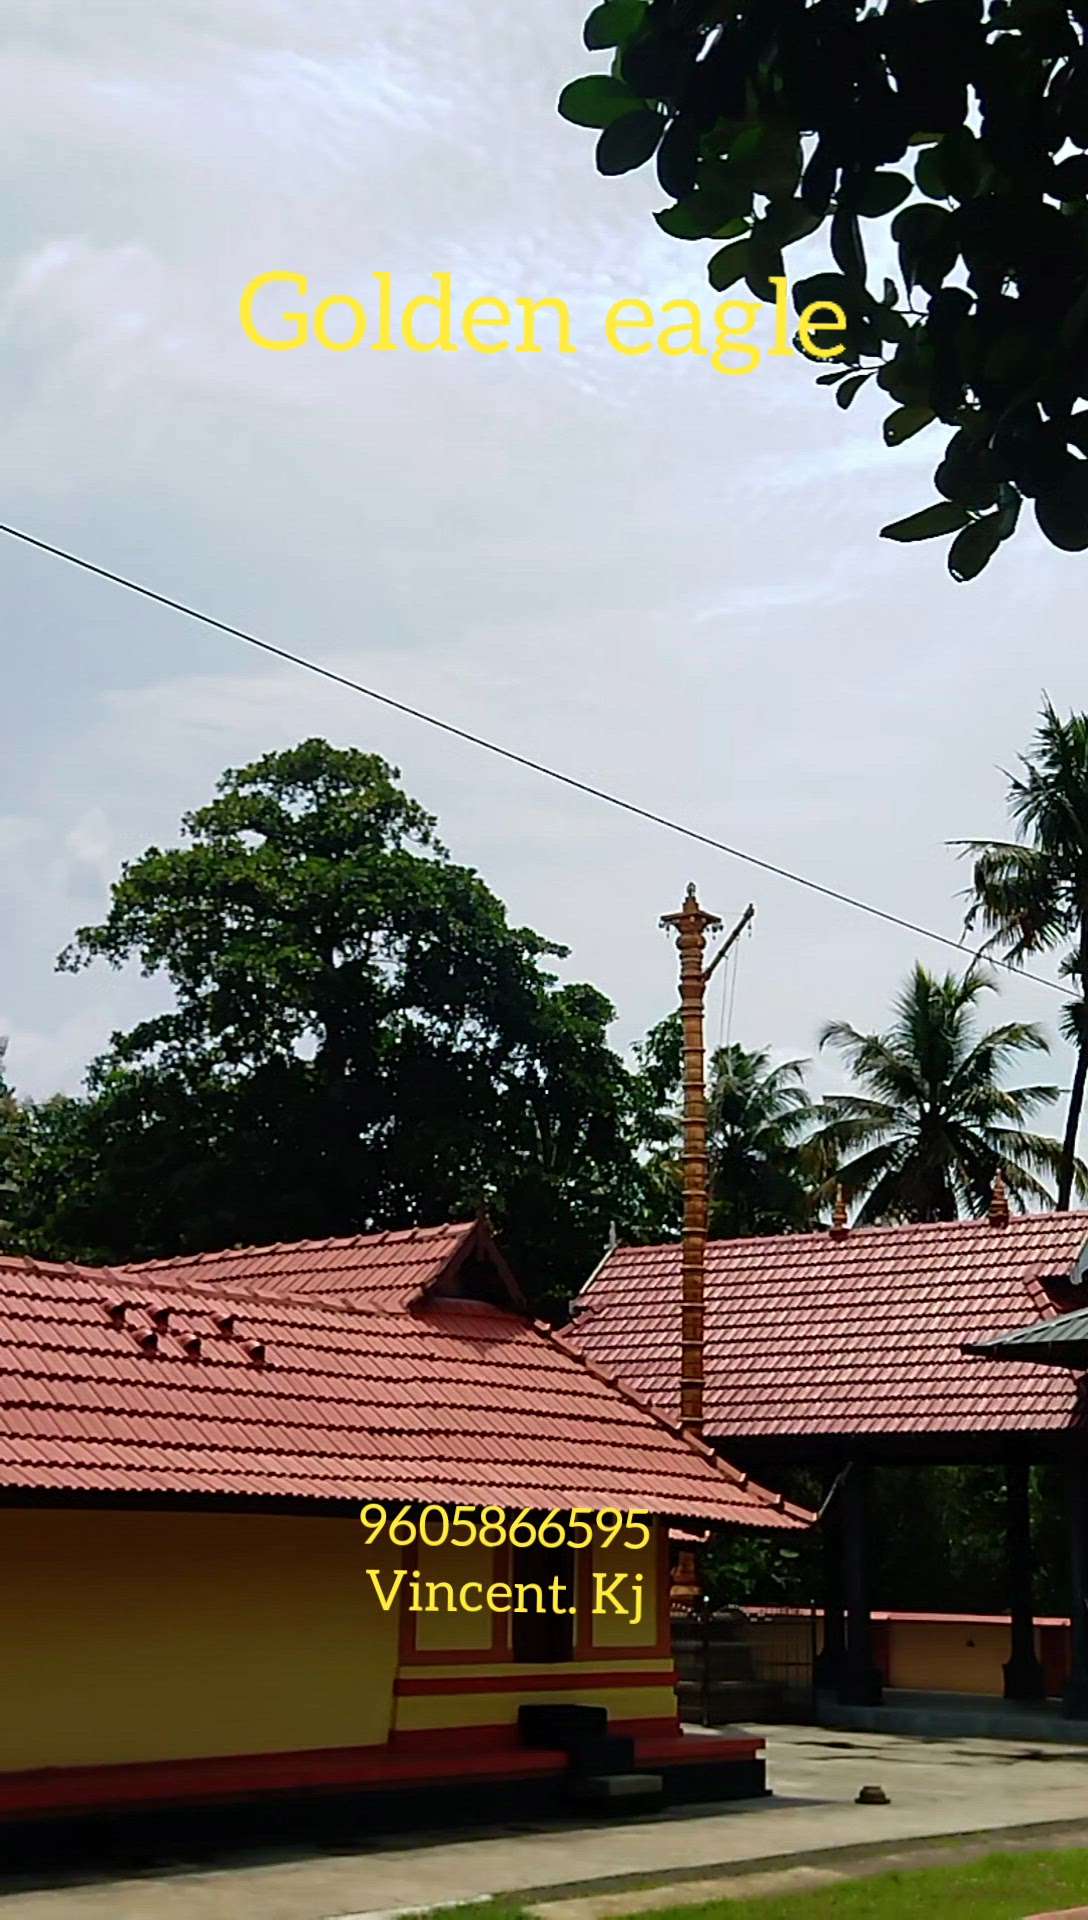 Roof works, all kerala. 9605866595